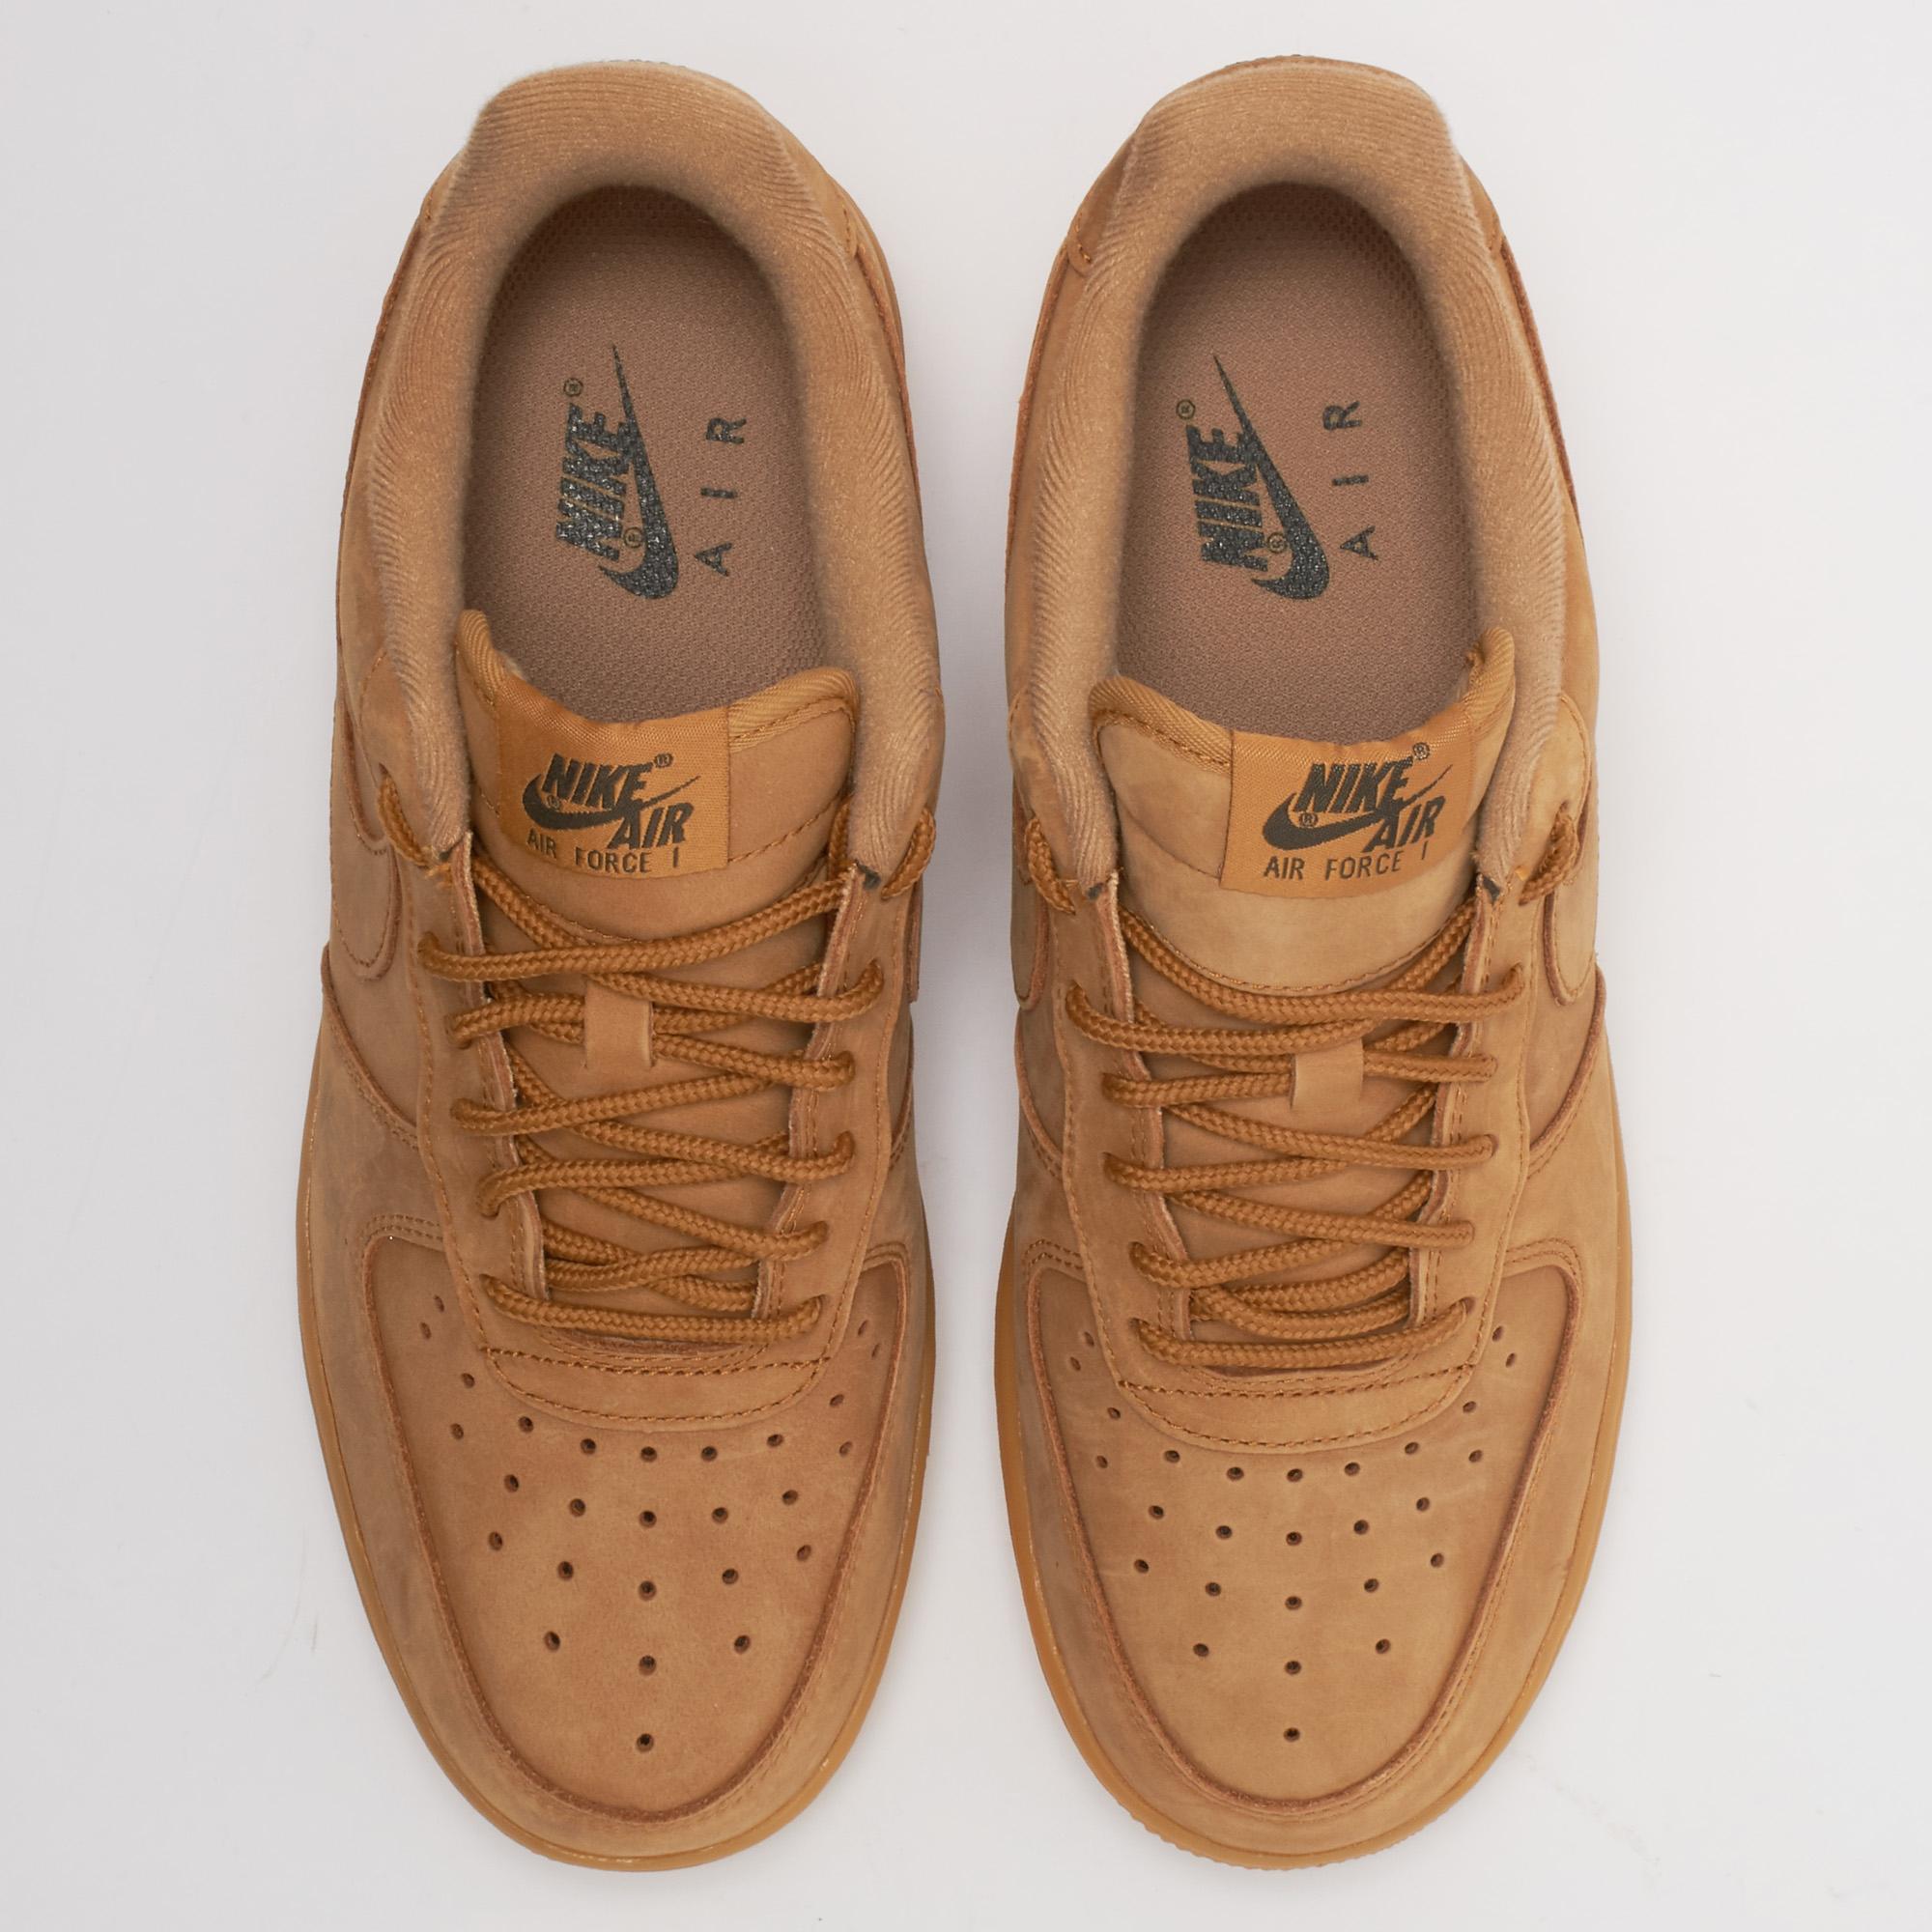 Air Force Trainers Nike Camel Size UK In Suede 29733635, 48% OFF